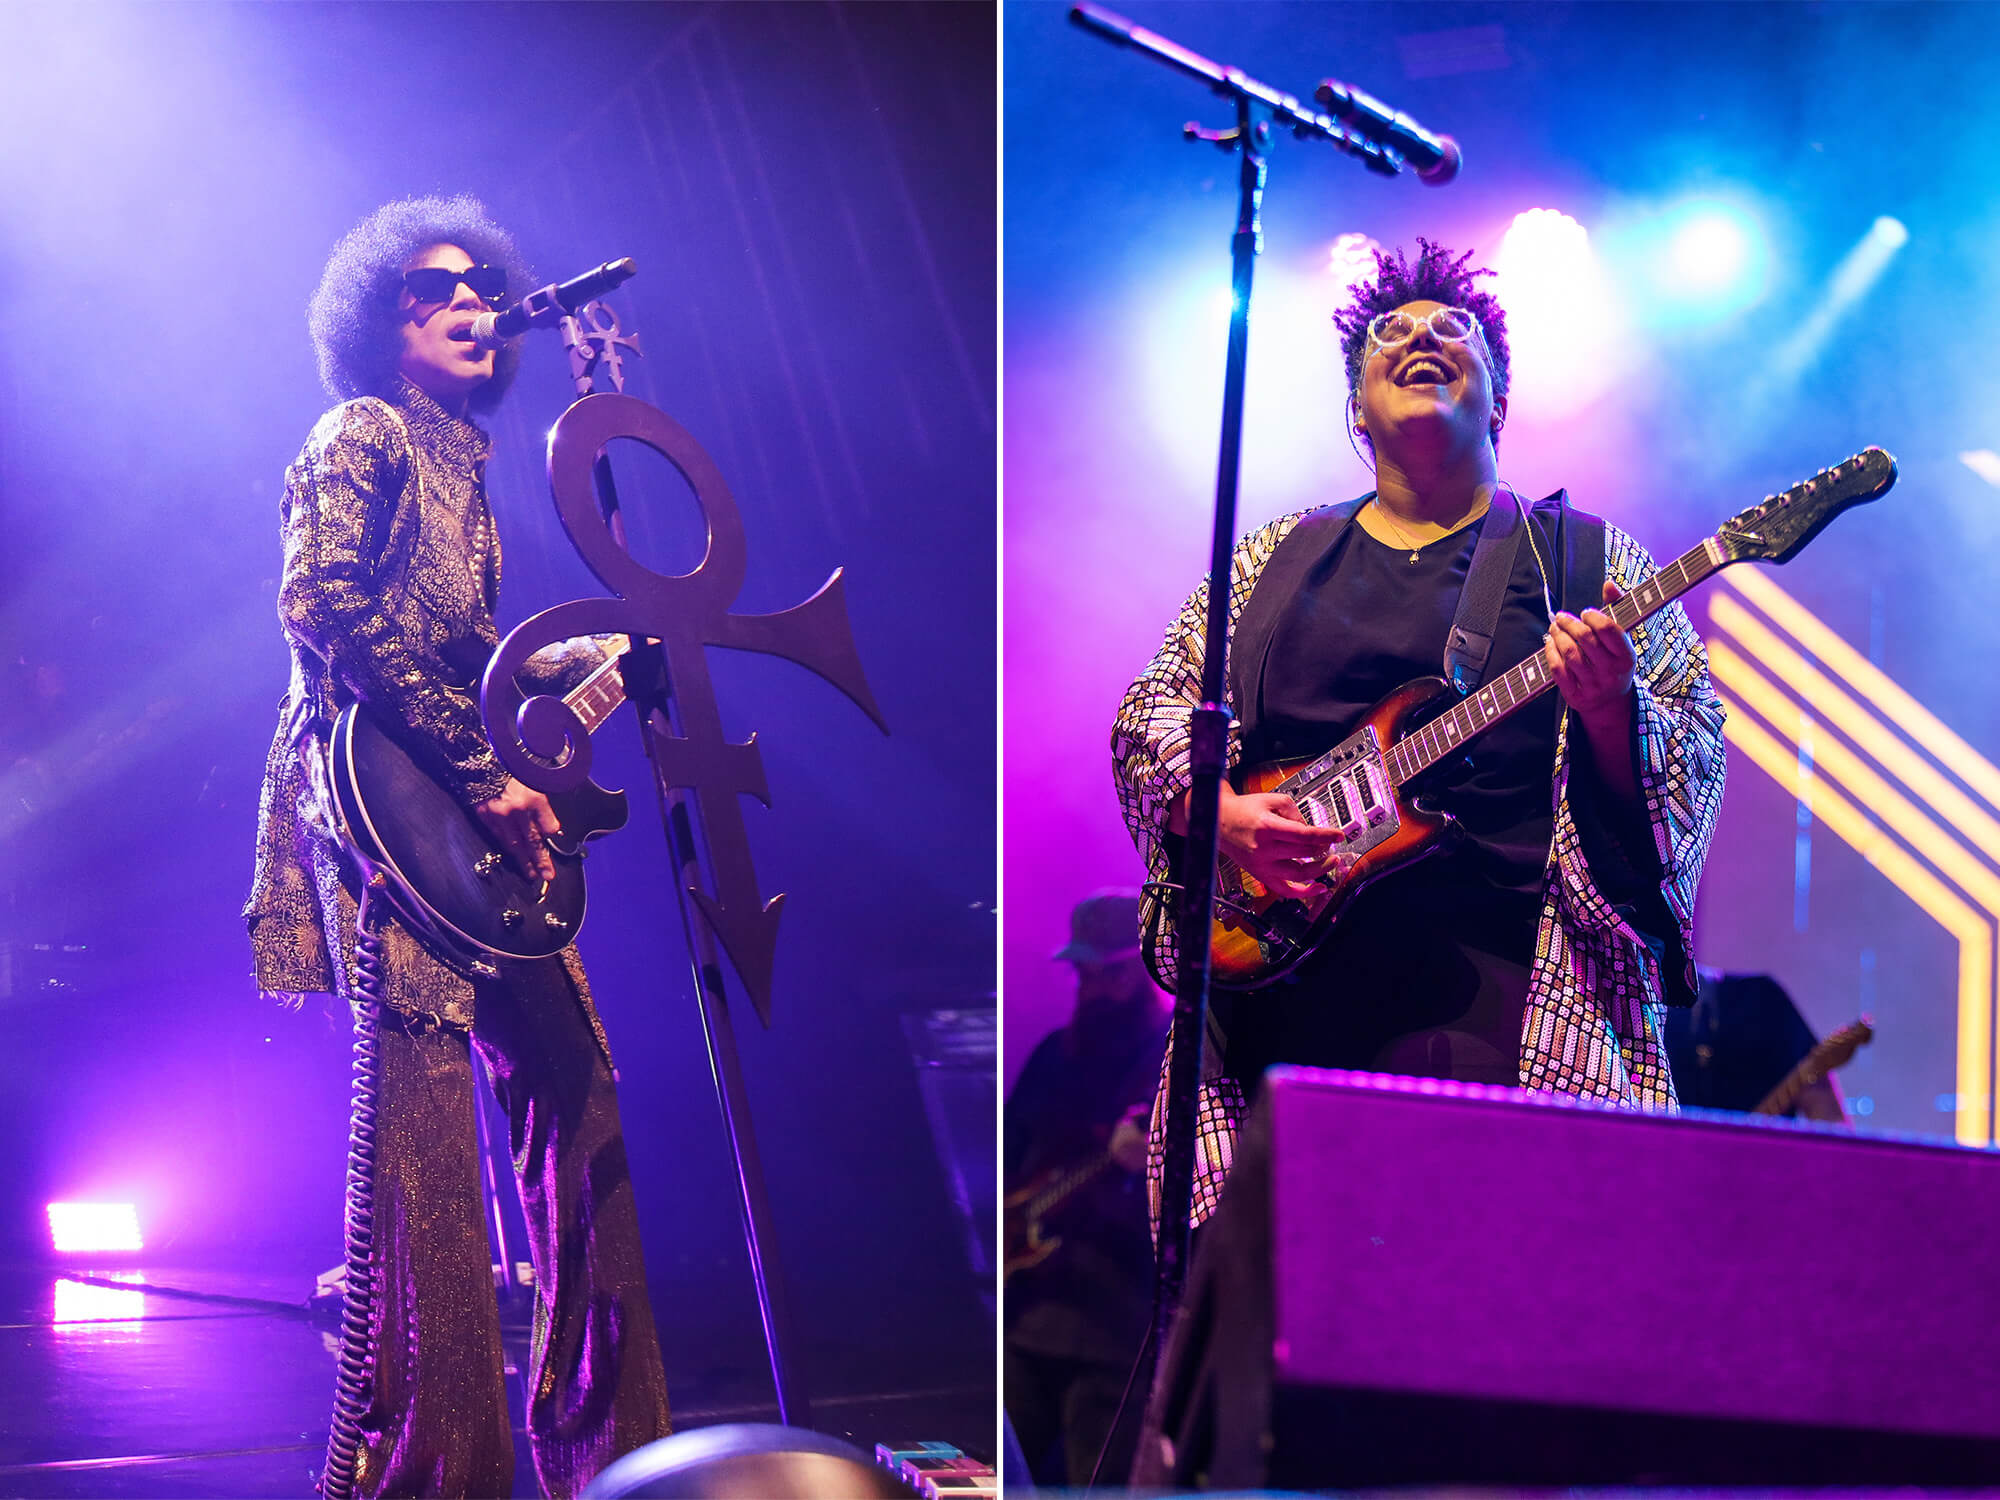 Prince (left) playing guitar and singing into a mic. He is wearing shades and the stage is lit up purple. Brittany Howard (right) on stage. She is smiling widely and is playing guitar, the stage she is on is also lit up by purple lighting.